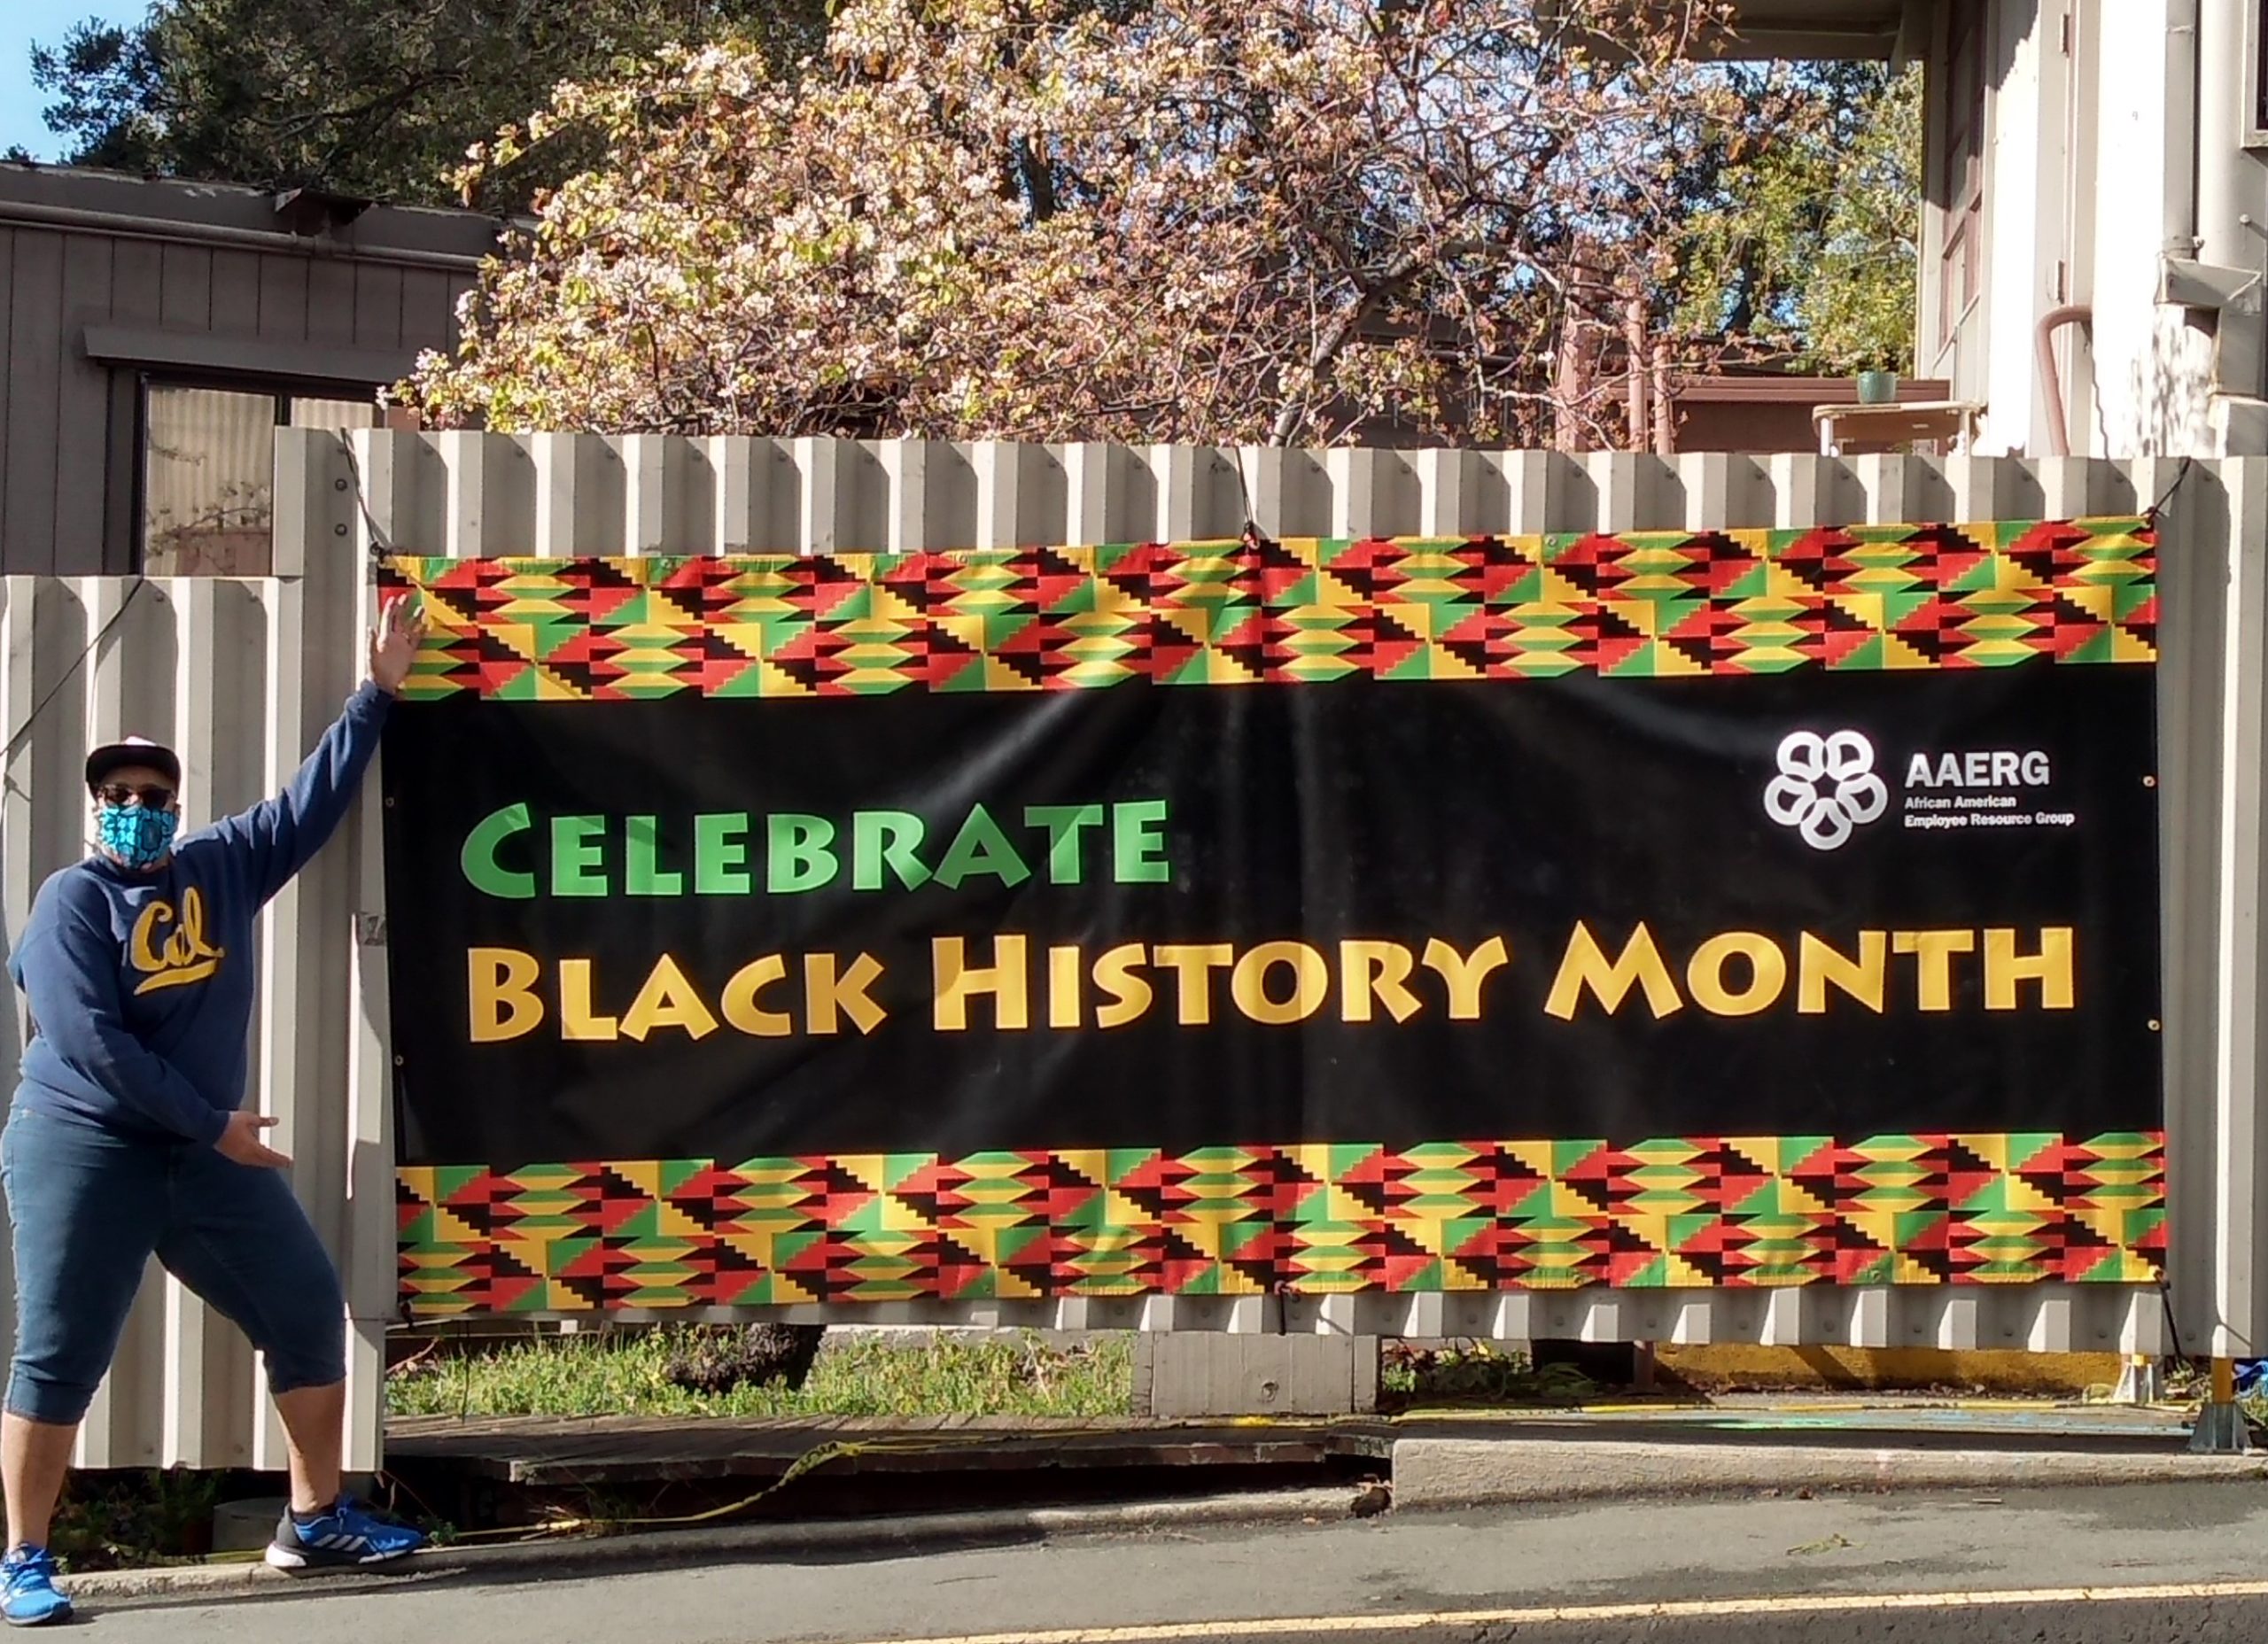 Black history month banner on fence